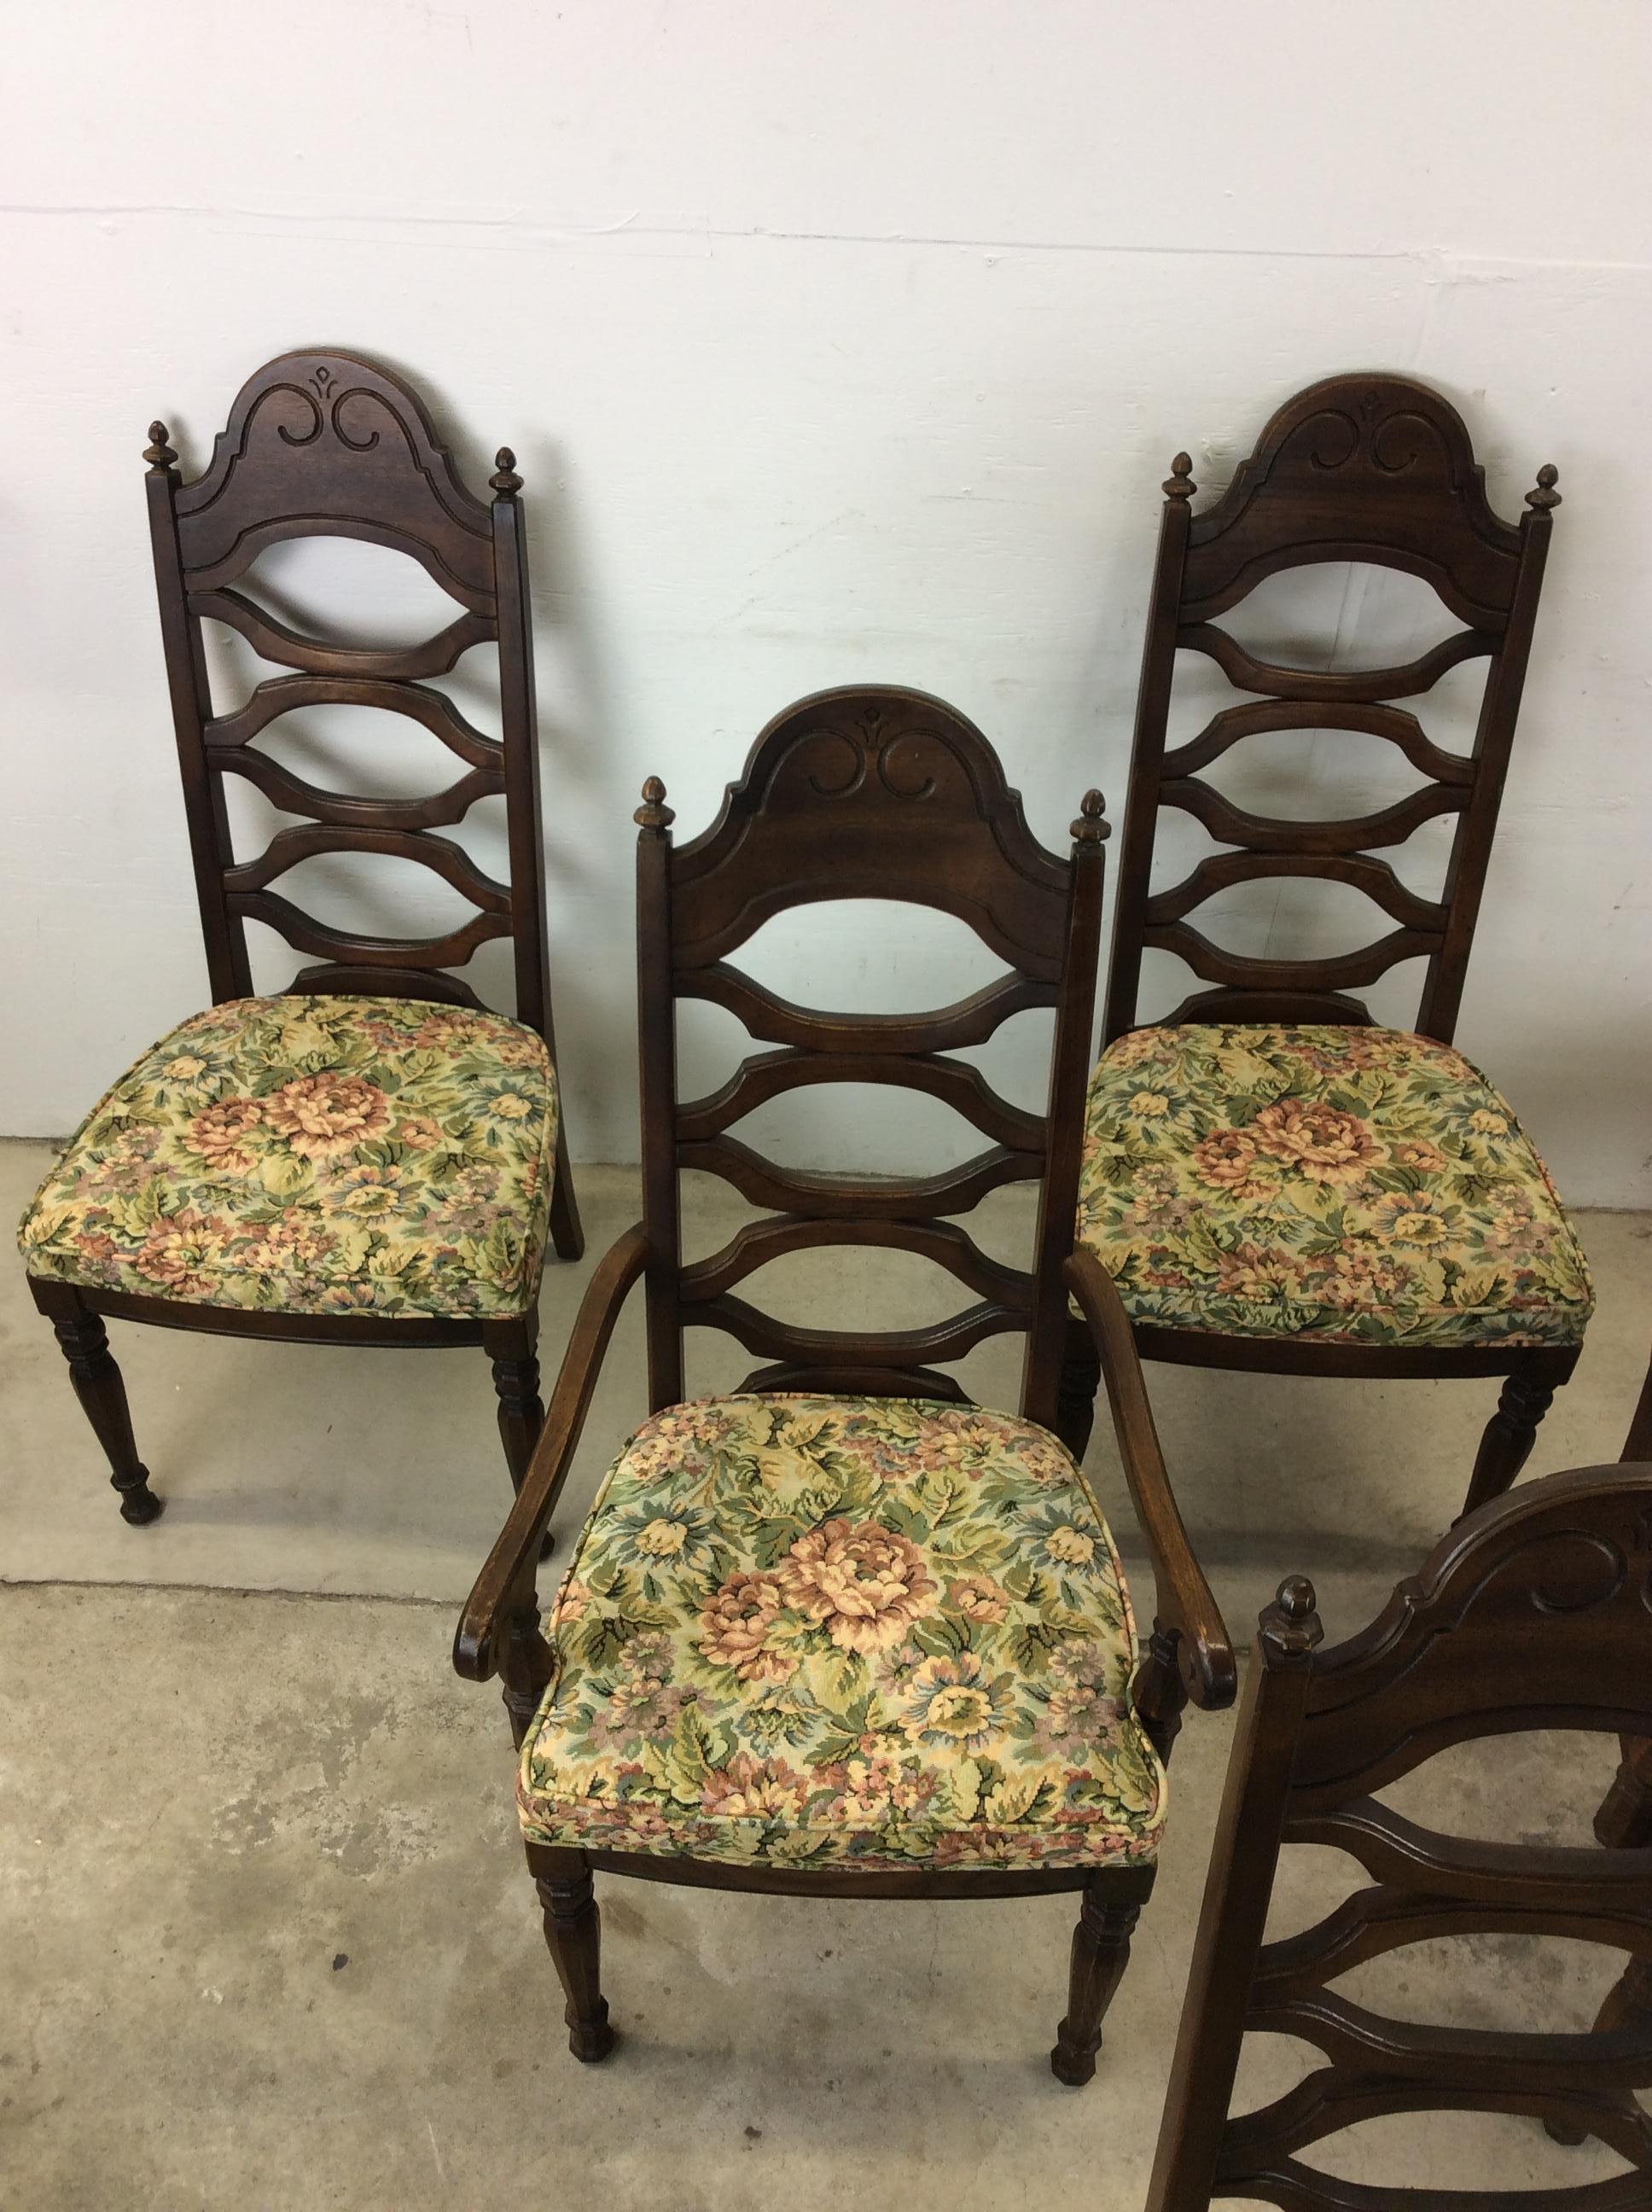 This set of 6 mid century modern dining chairs features hardwood construction, original walnut finish, high back design with unique open back design, vintage floral upholstery, and tall tapered legs.

Dimensions: 20w 25d 43.5h 19sh